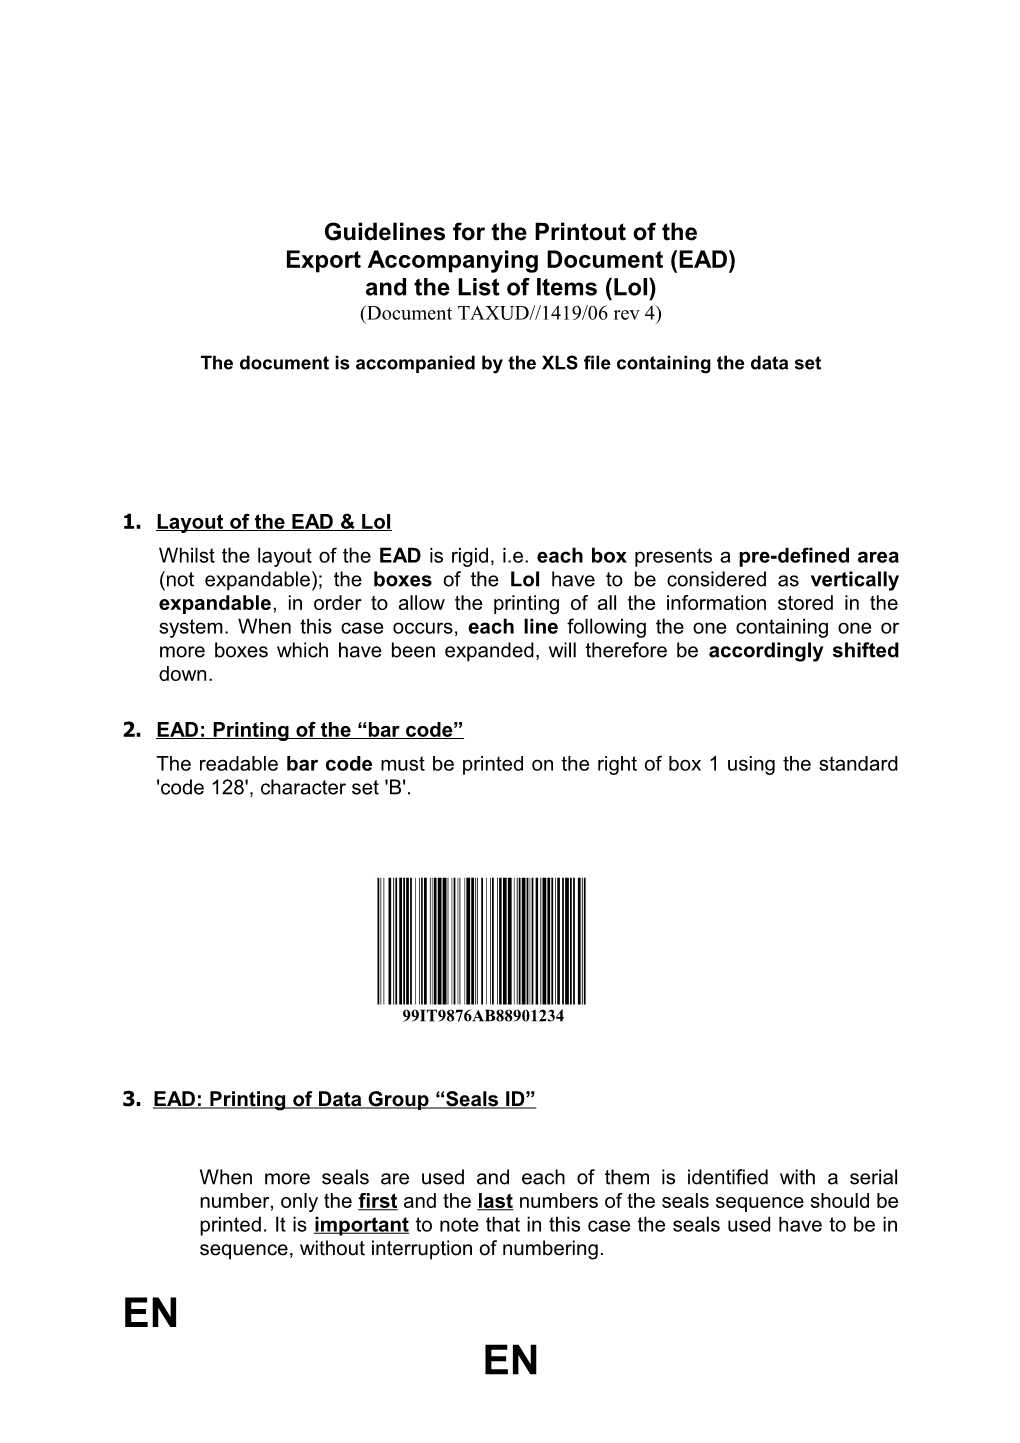 Guidelines for the Printout of The